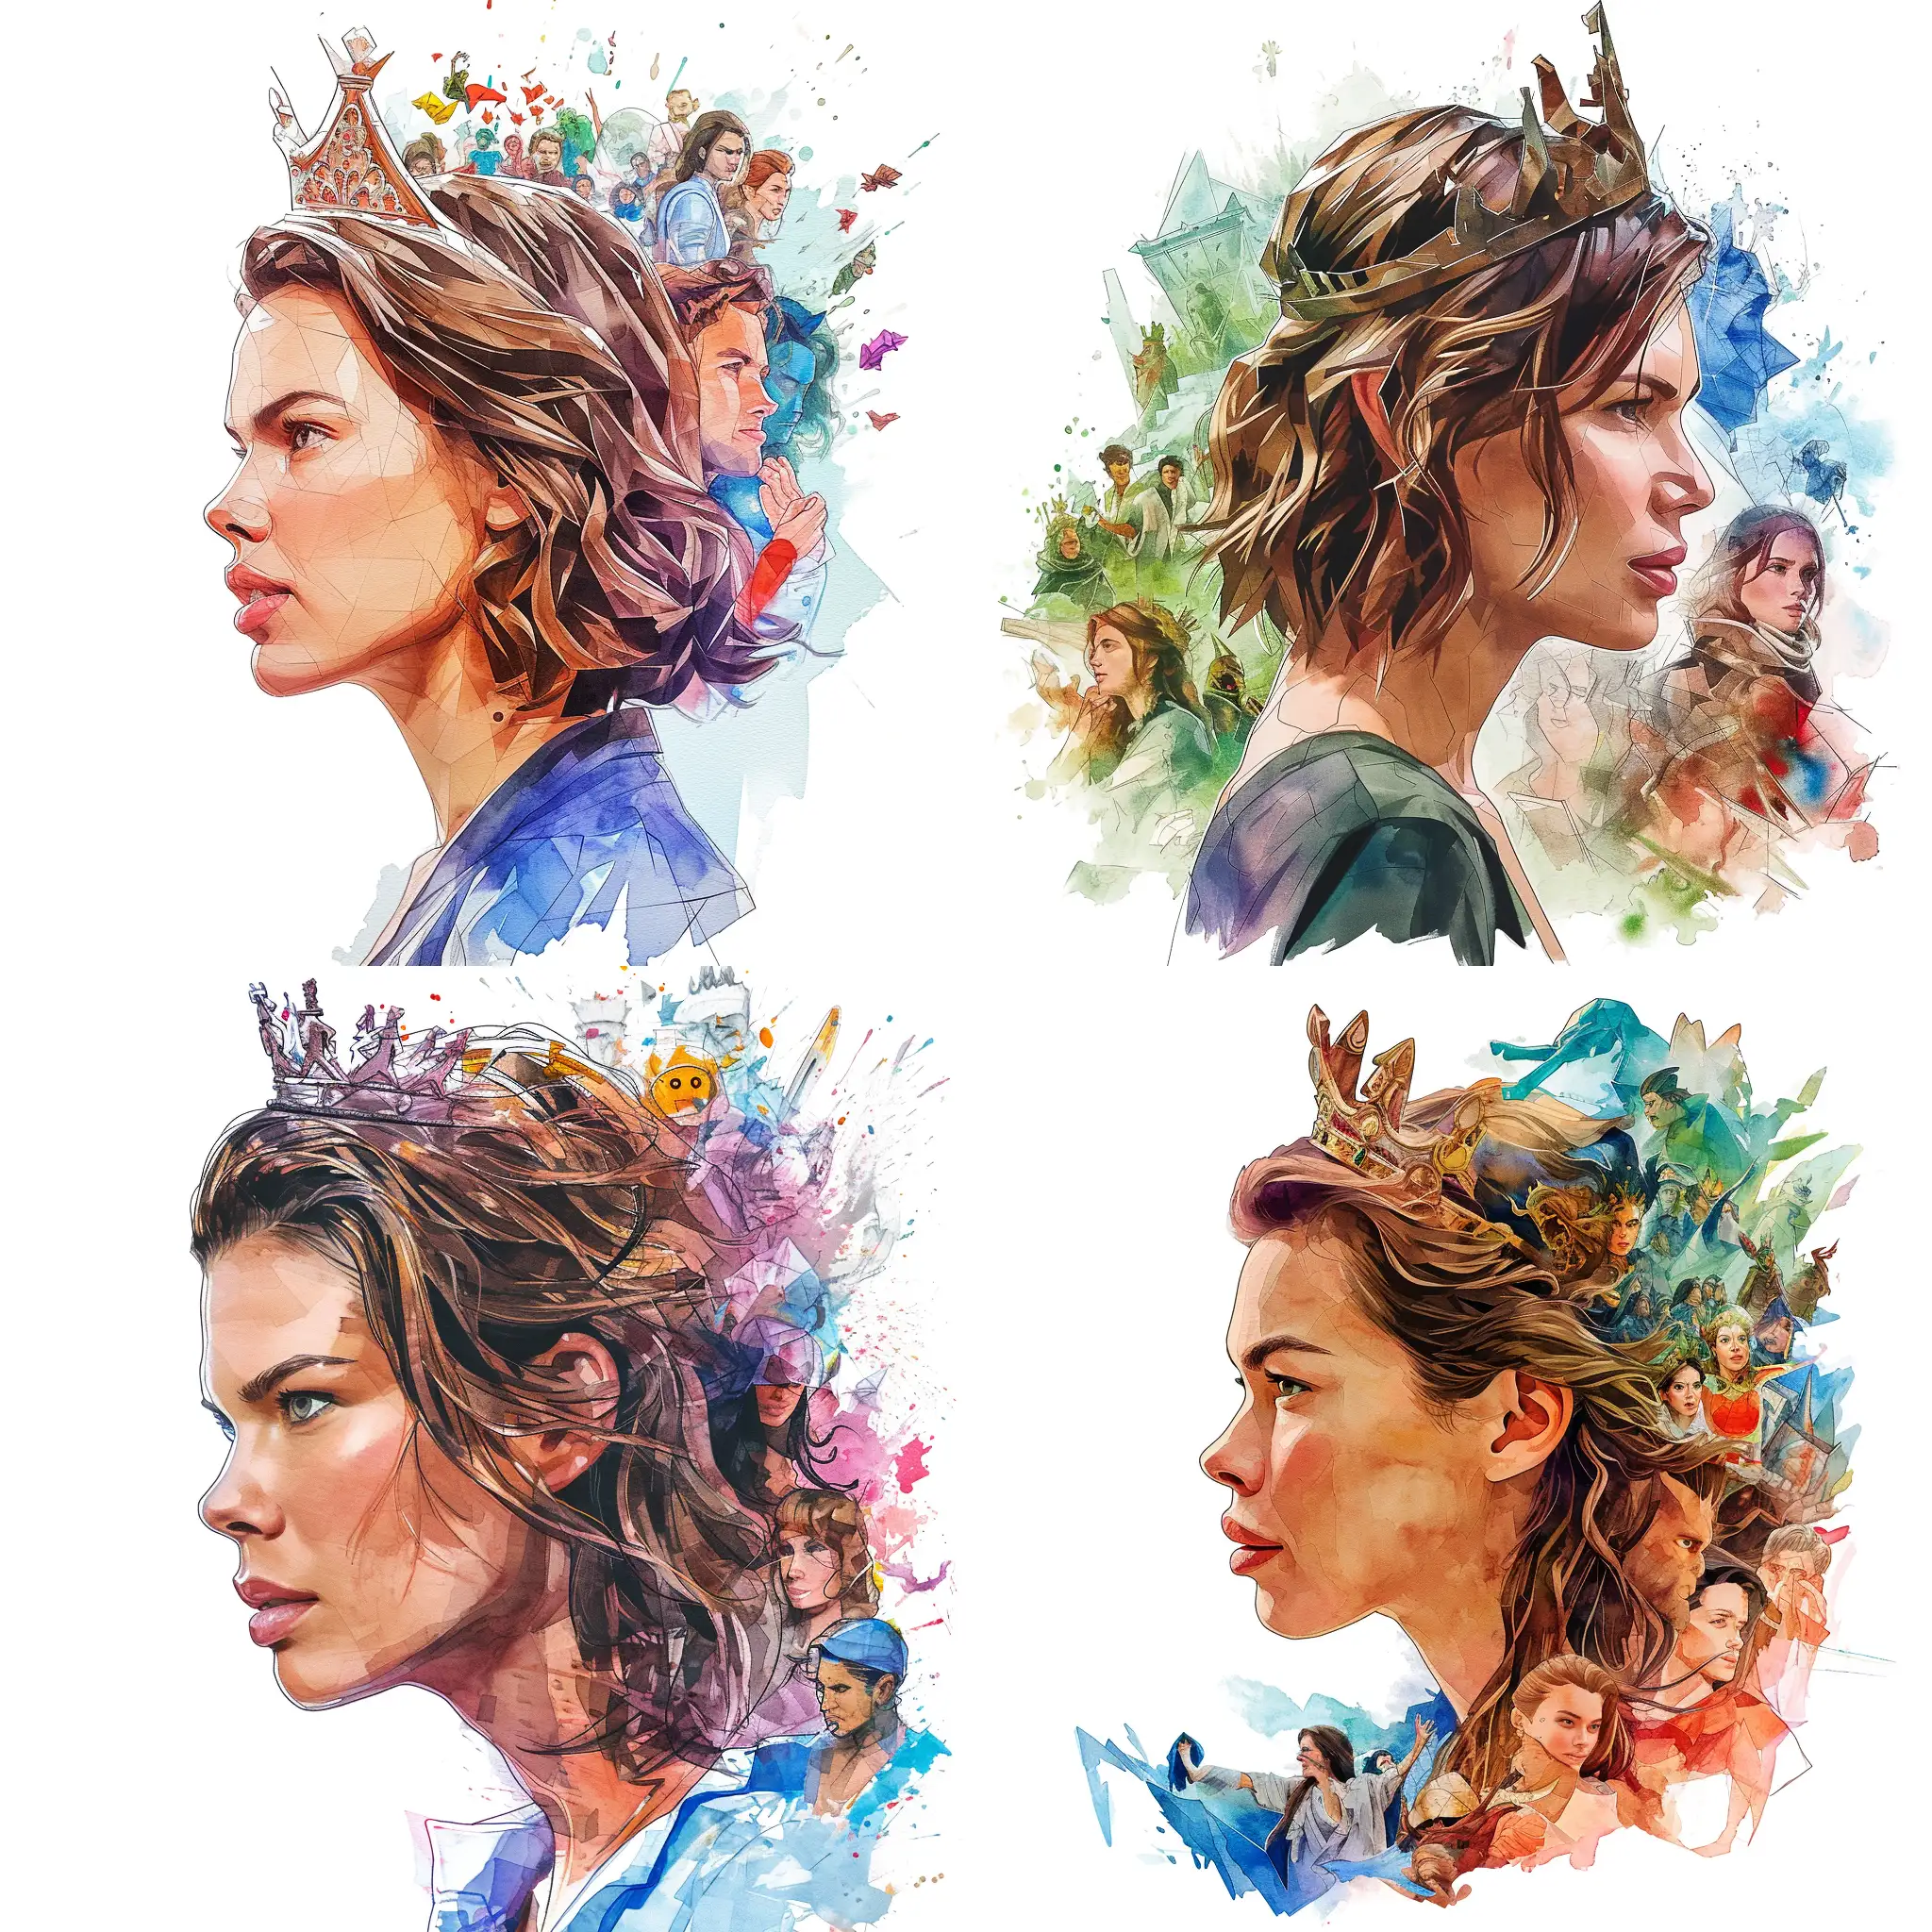 Mila-Jovovich-as-Lilu-with-Crown-Cinematic-Caricature-Portrait